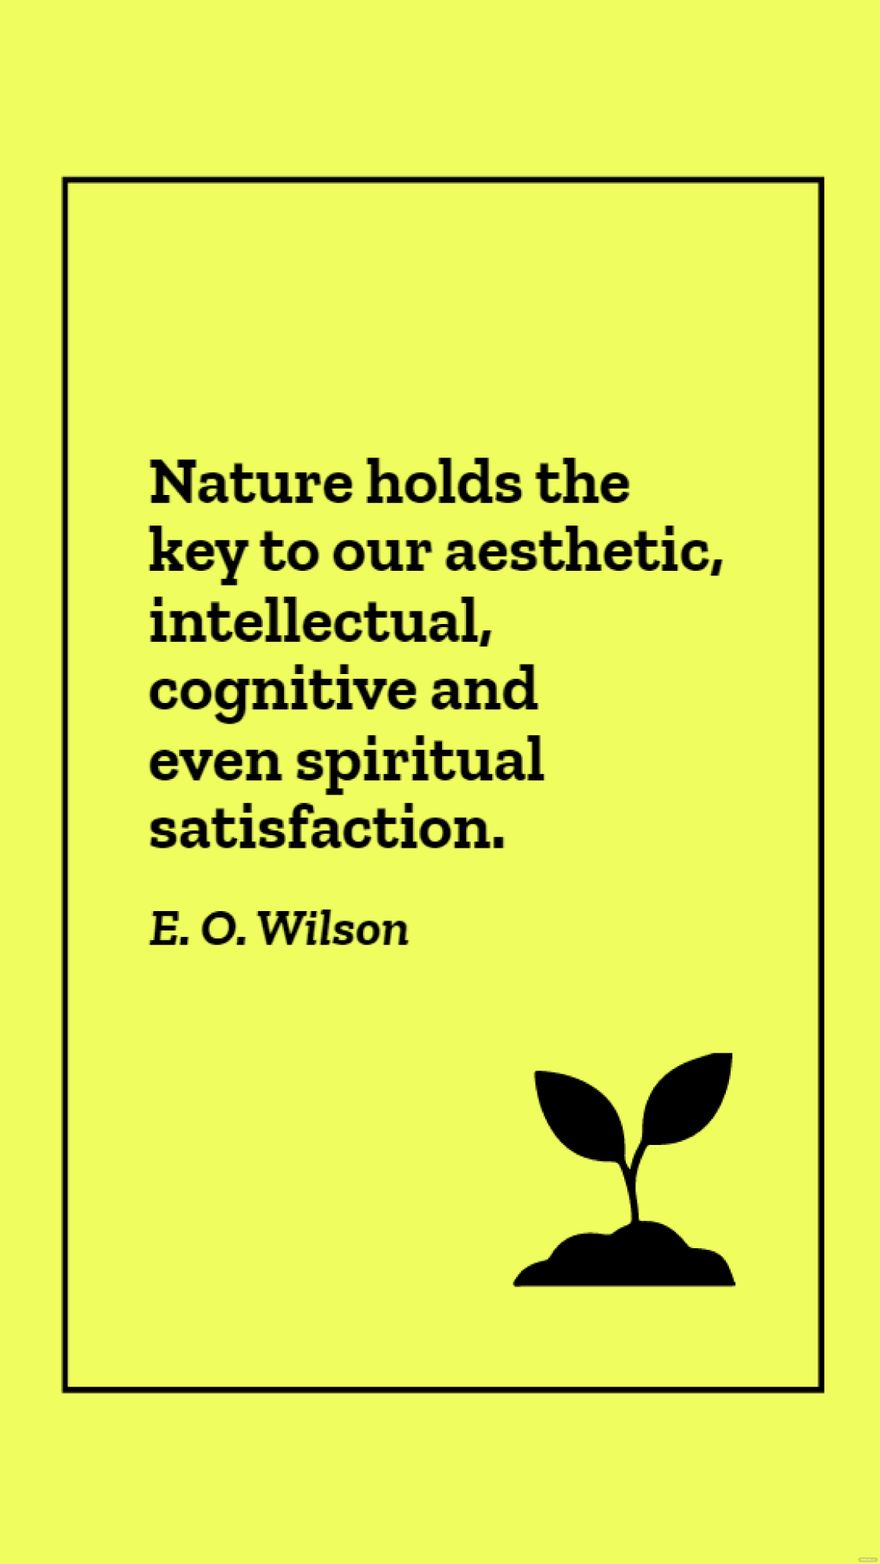 Free E. O. Wilson - Nature holds the key to our aesthetic, intellectual, cognitive and even spiritual satisfaction. in JPG